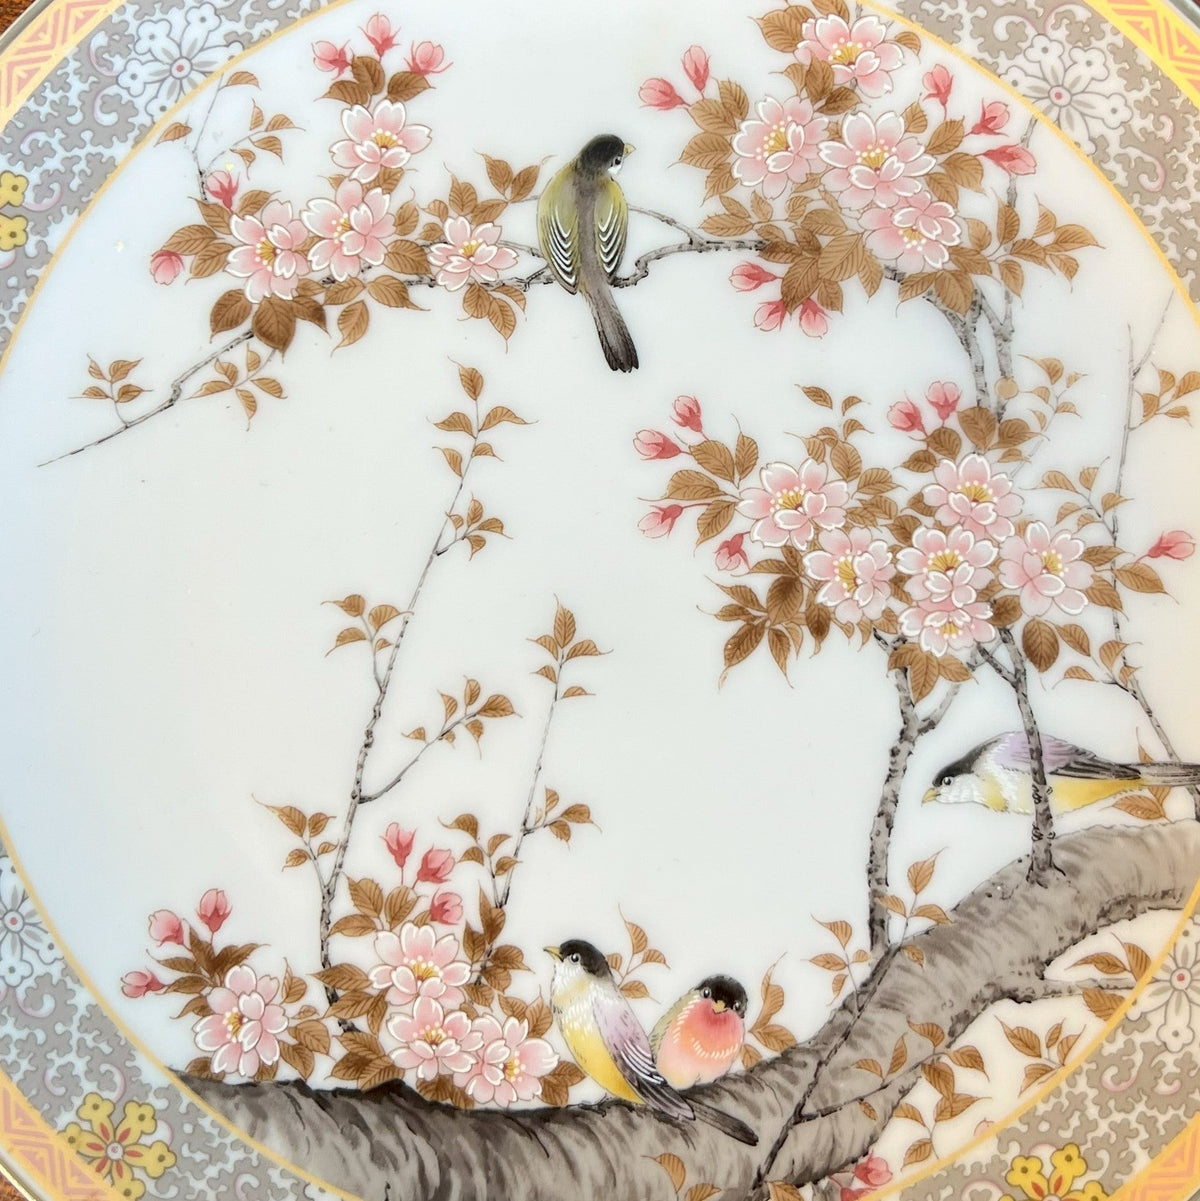 Japanese Garden Scene China Plate - The Finishing Store South Africa